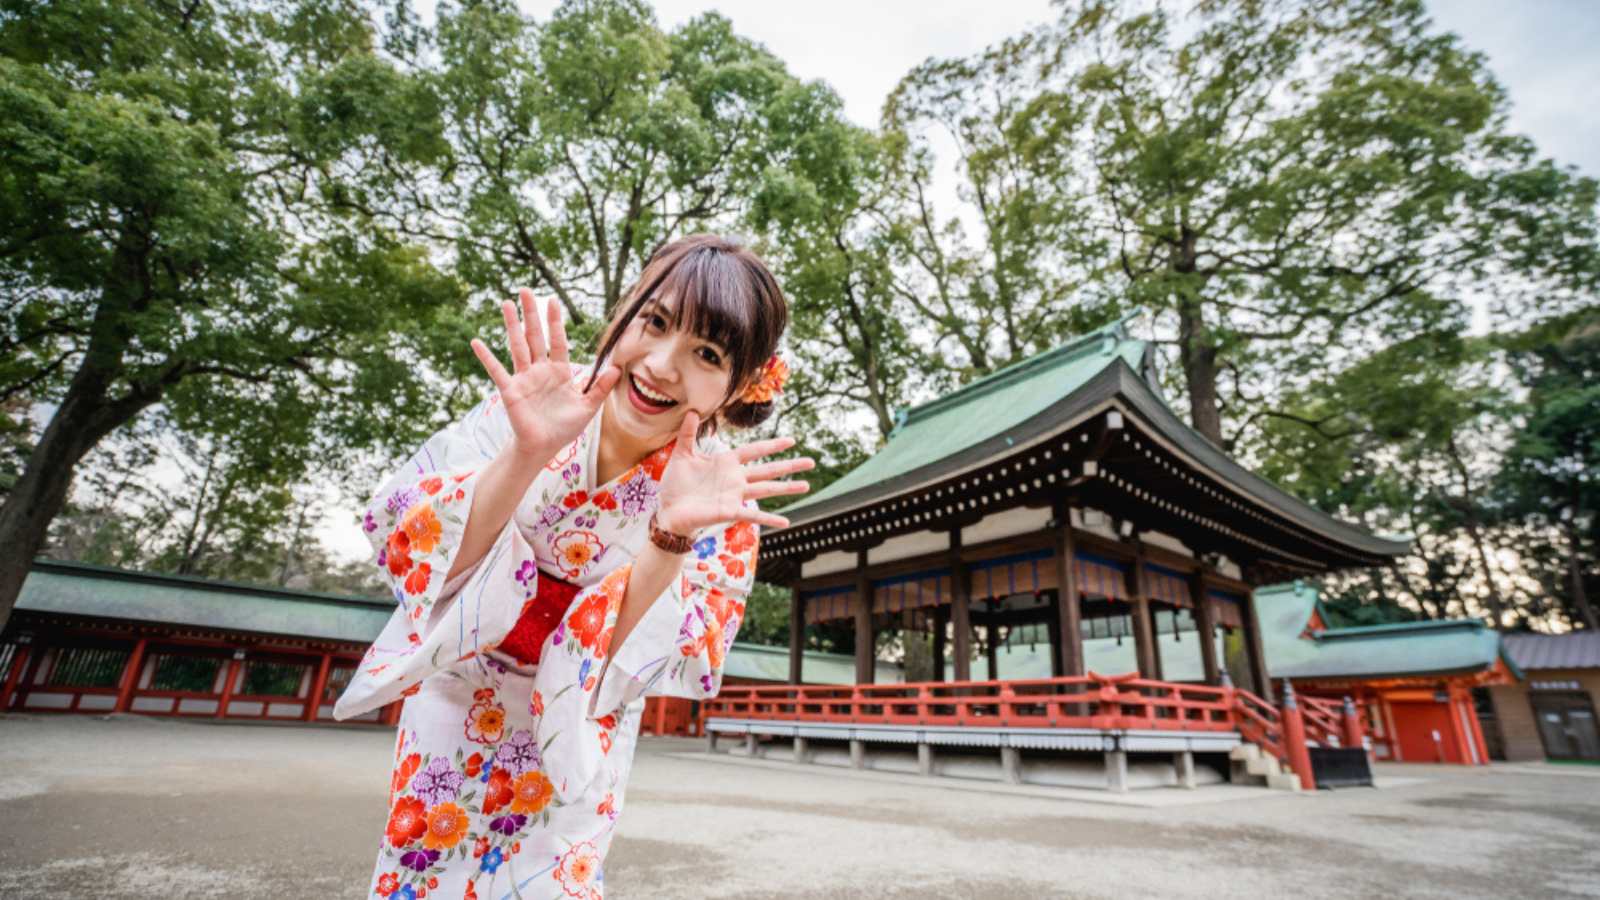 15 Interesting Facts About Japan You May Not Know